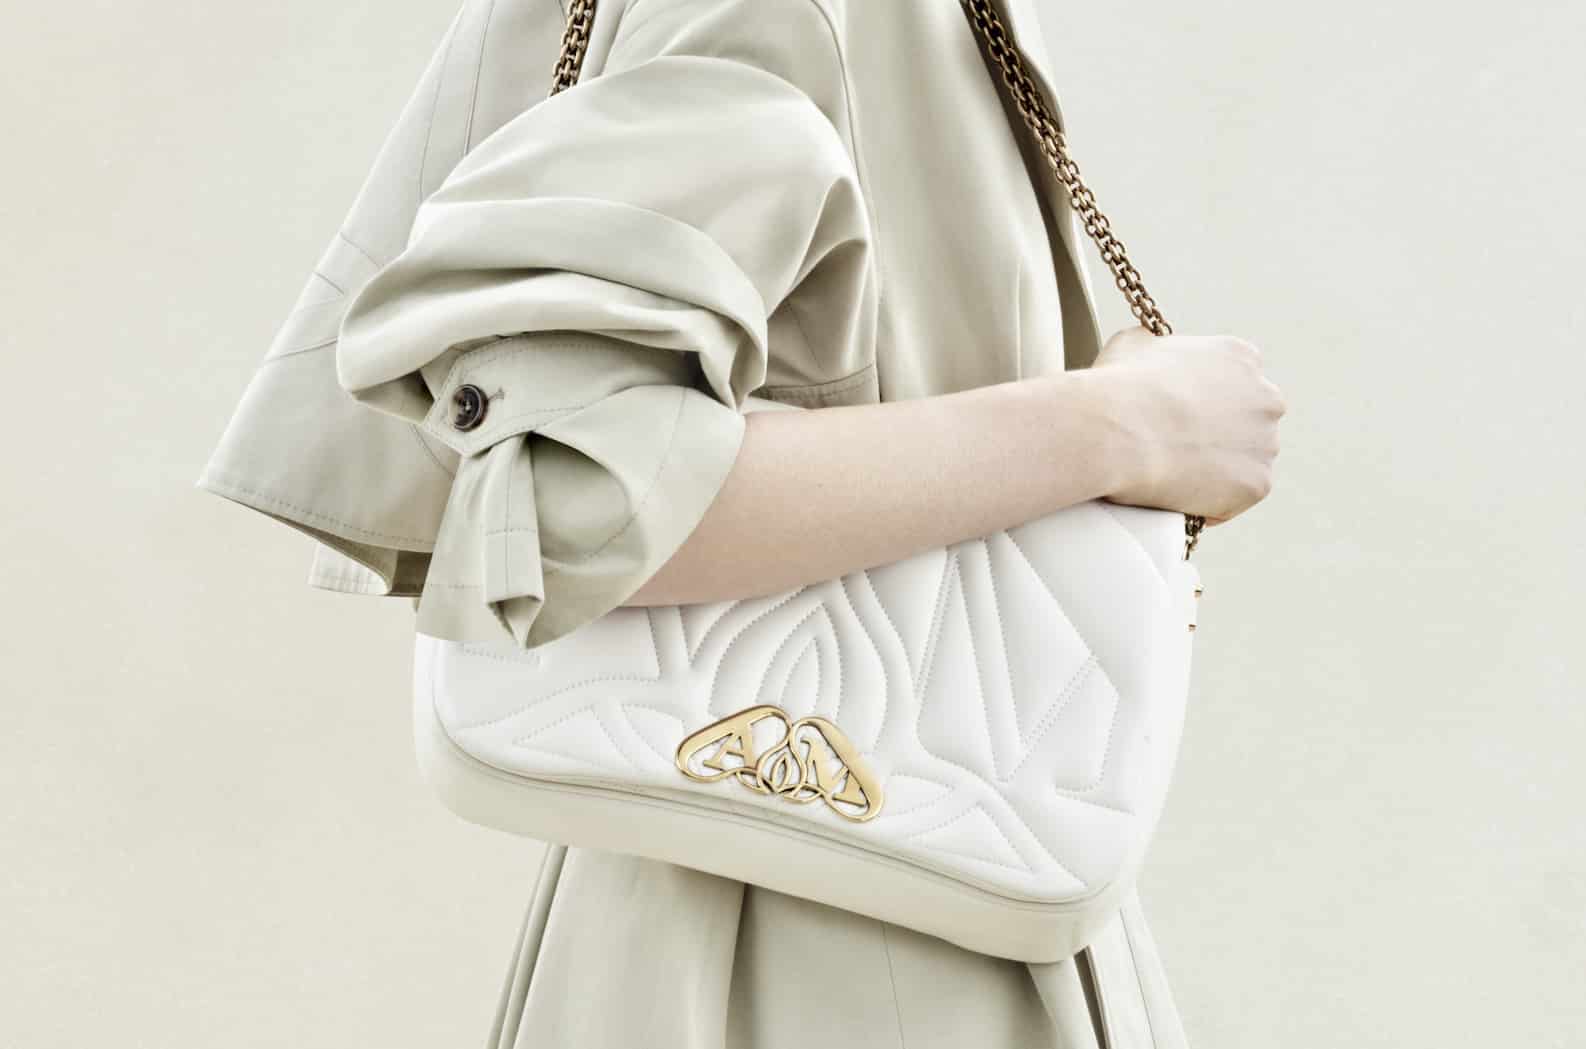 Read more about the article Alexander McQueen Seal Bag: The Brand’s Bag of the Season